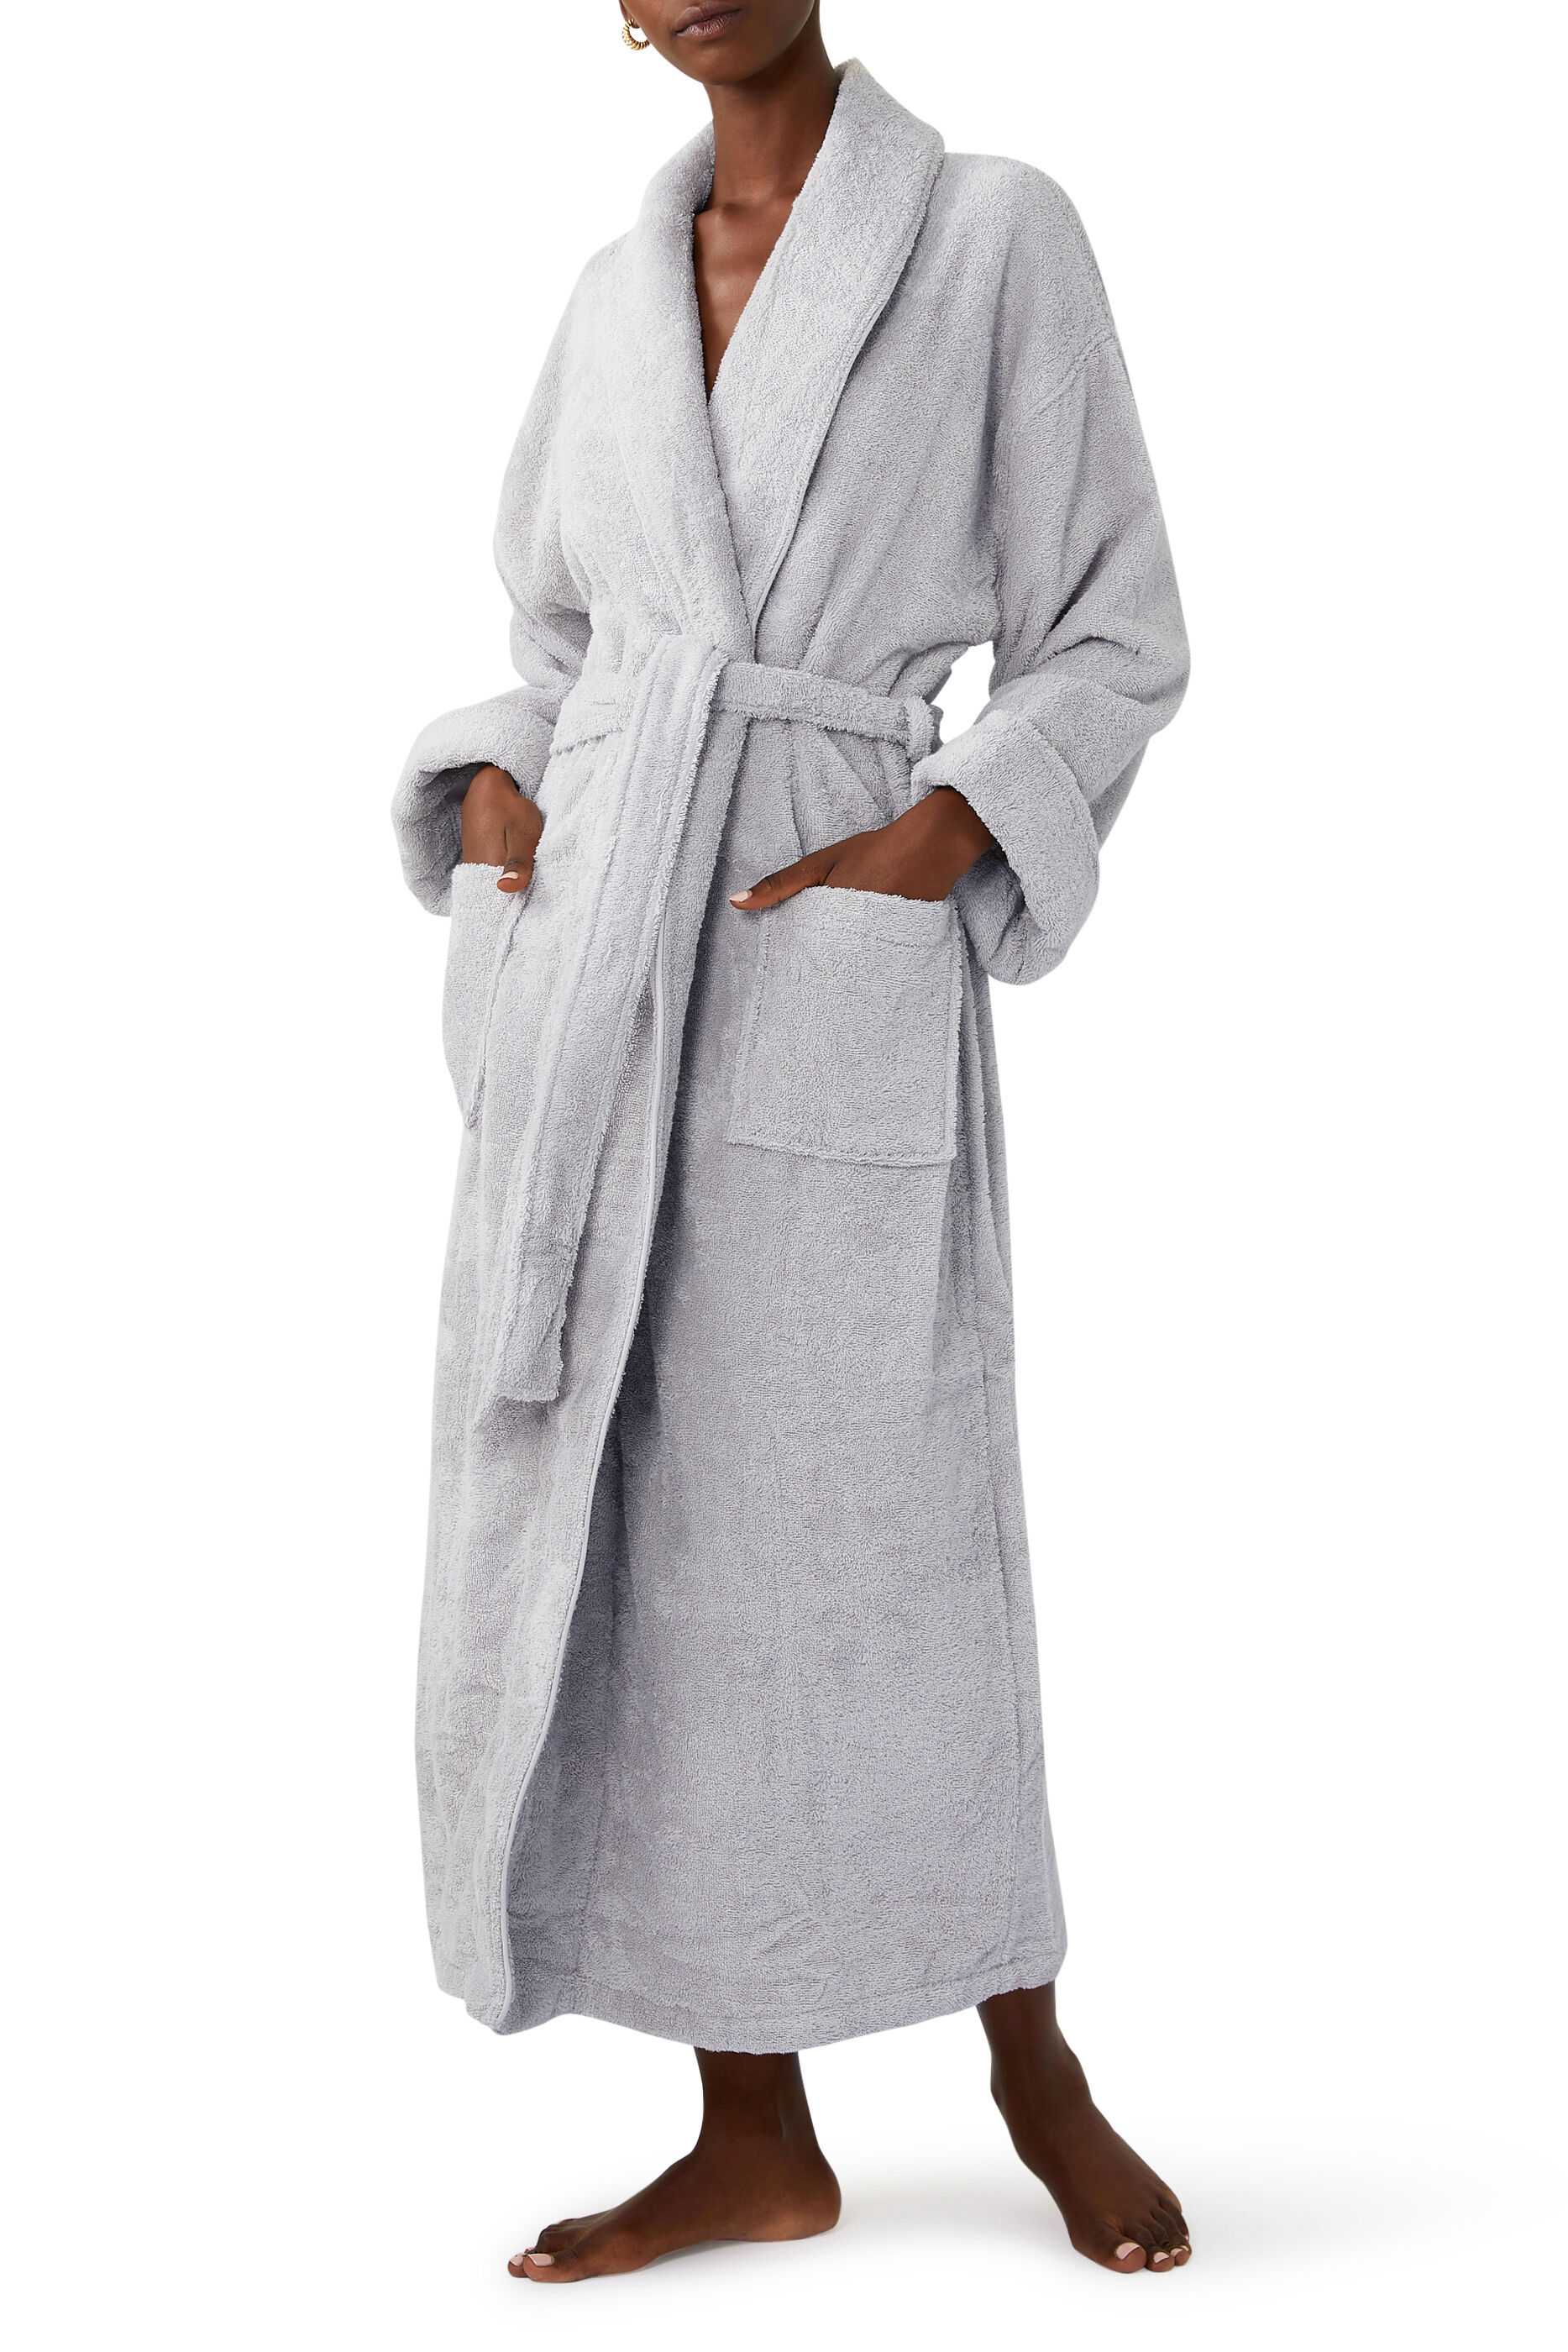 The White Company Womens Dressing Gowns | Selfridges